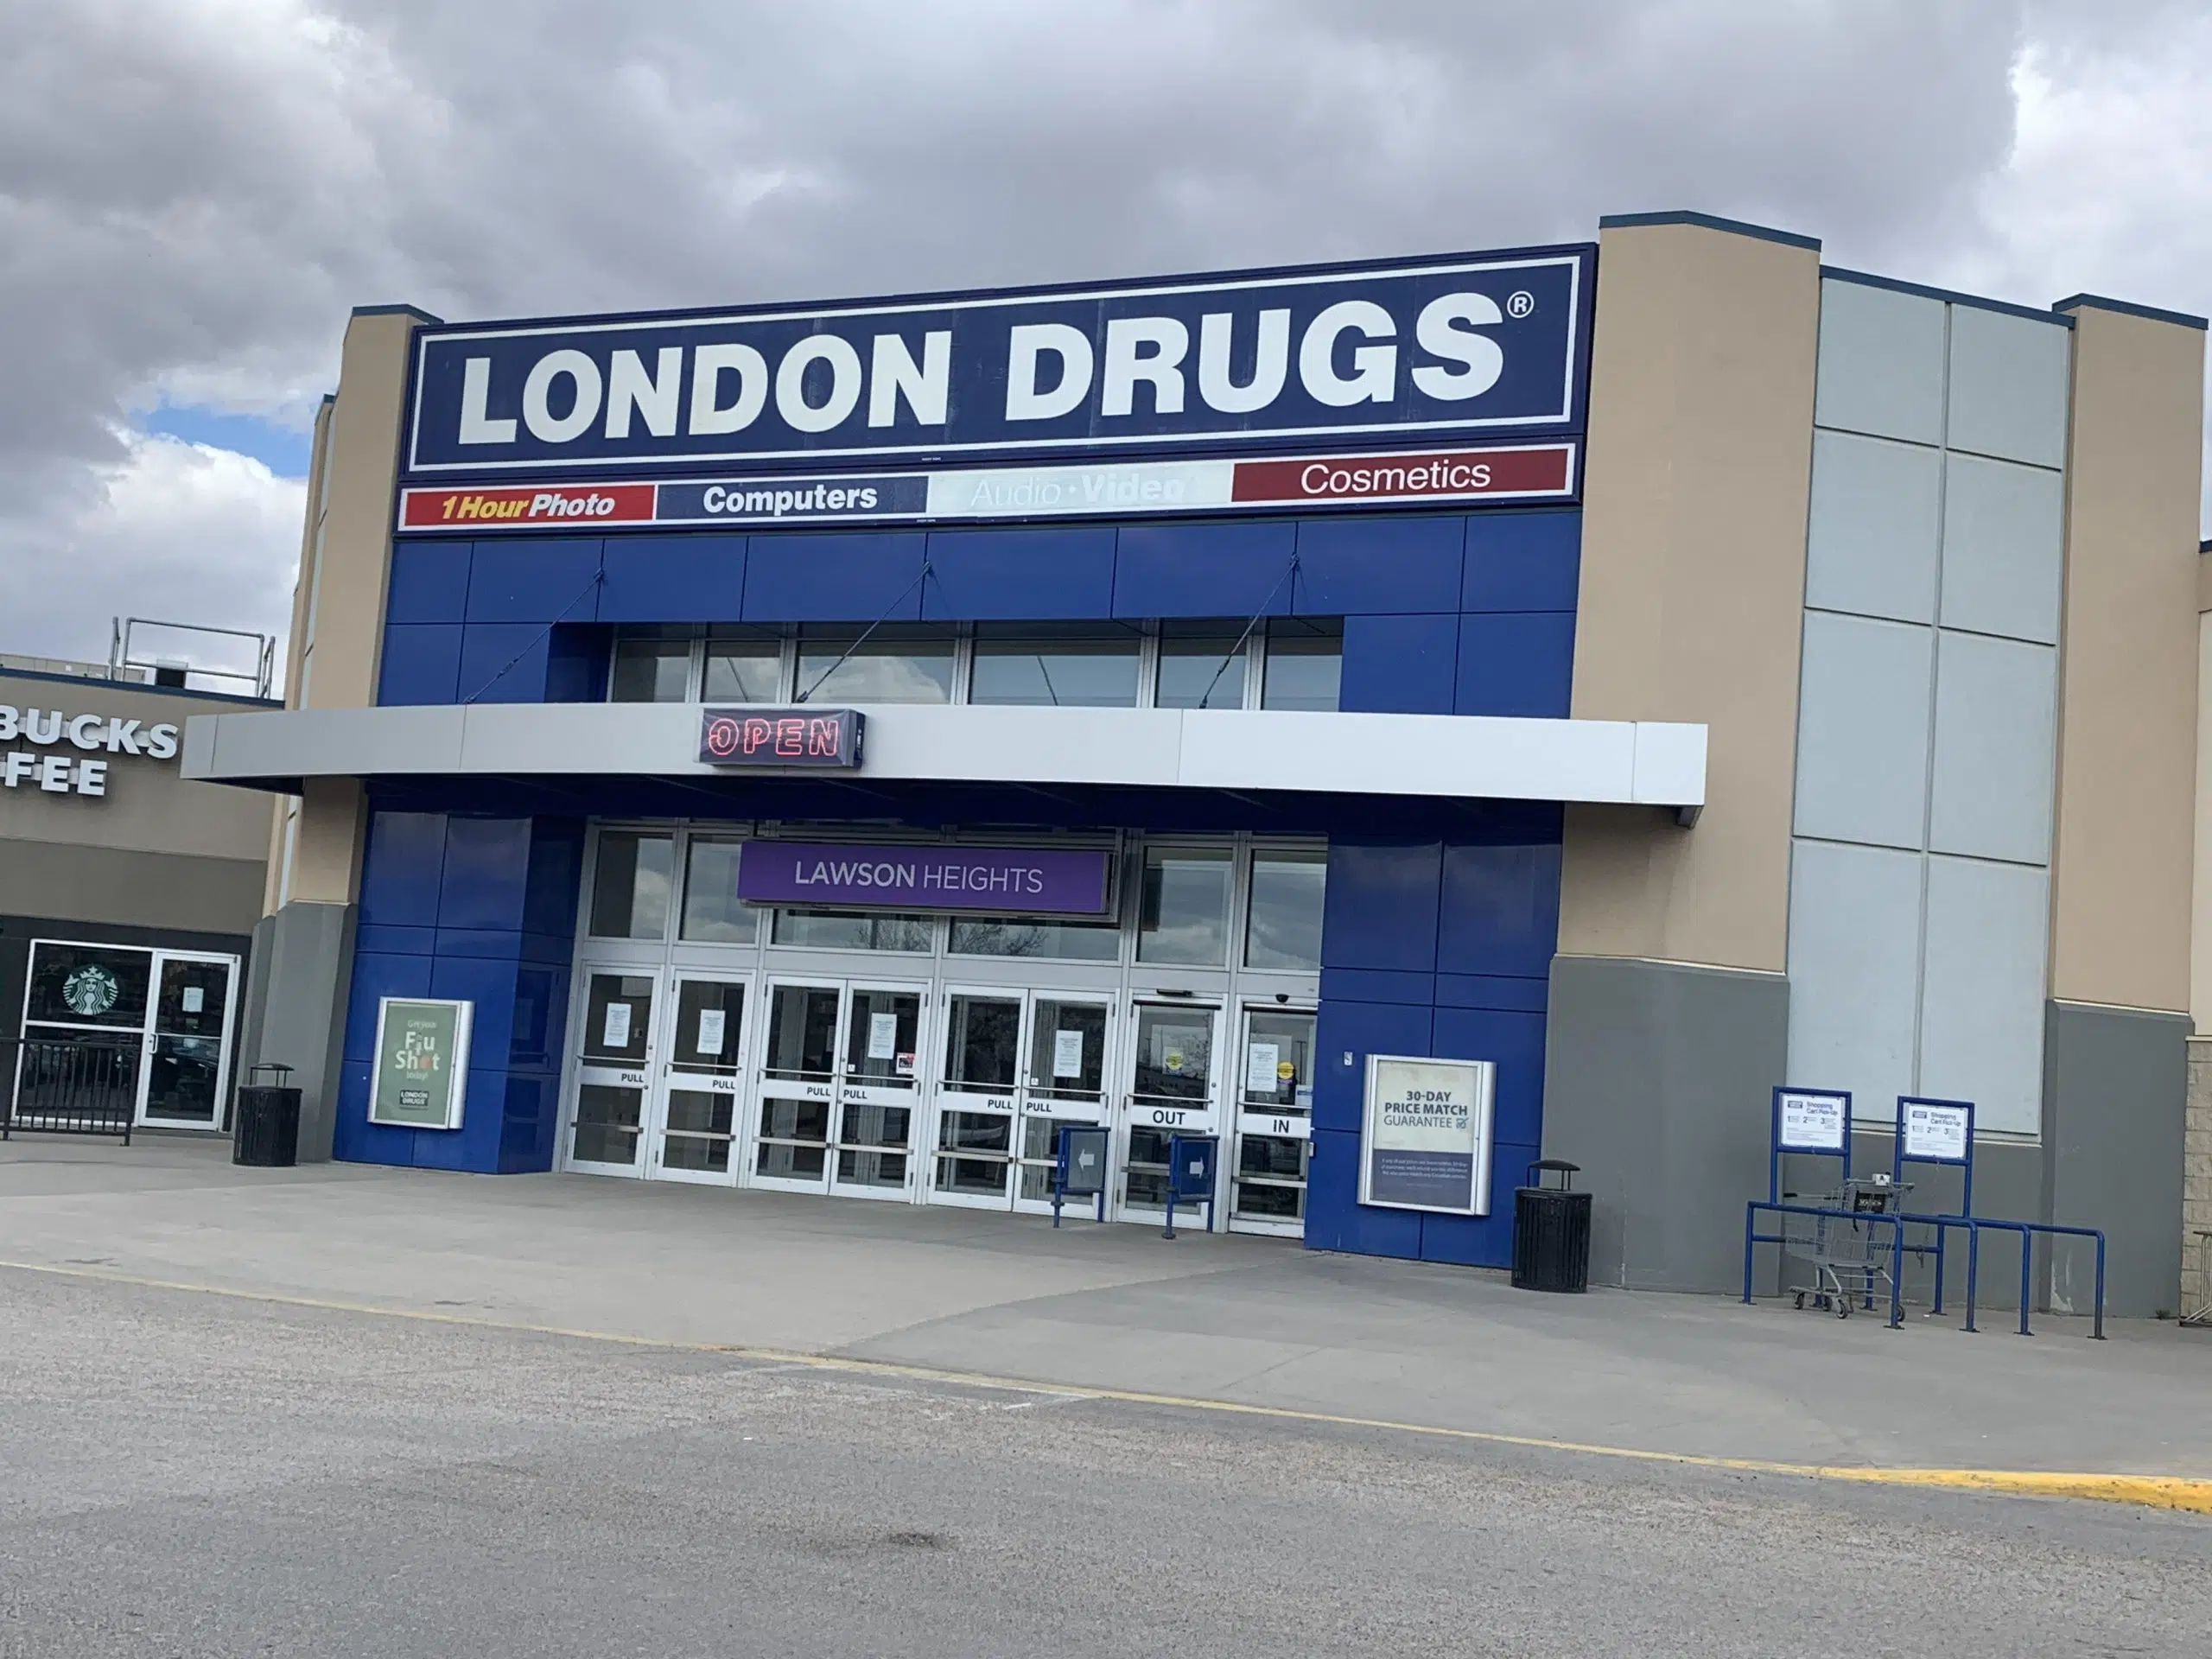 London Drugs stores offering shelf space to struggling small